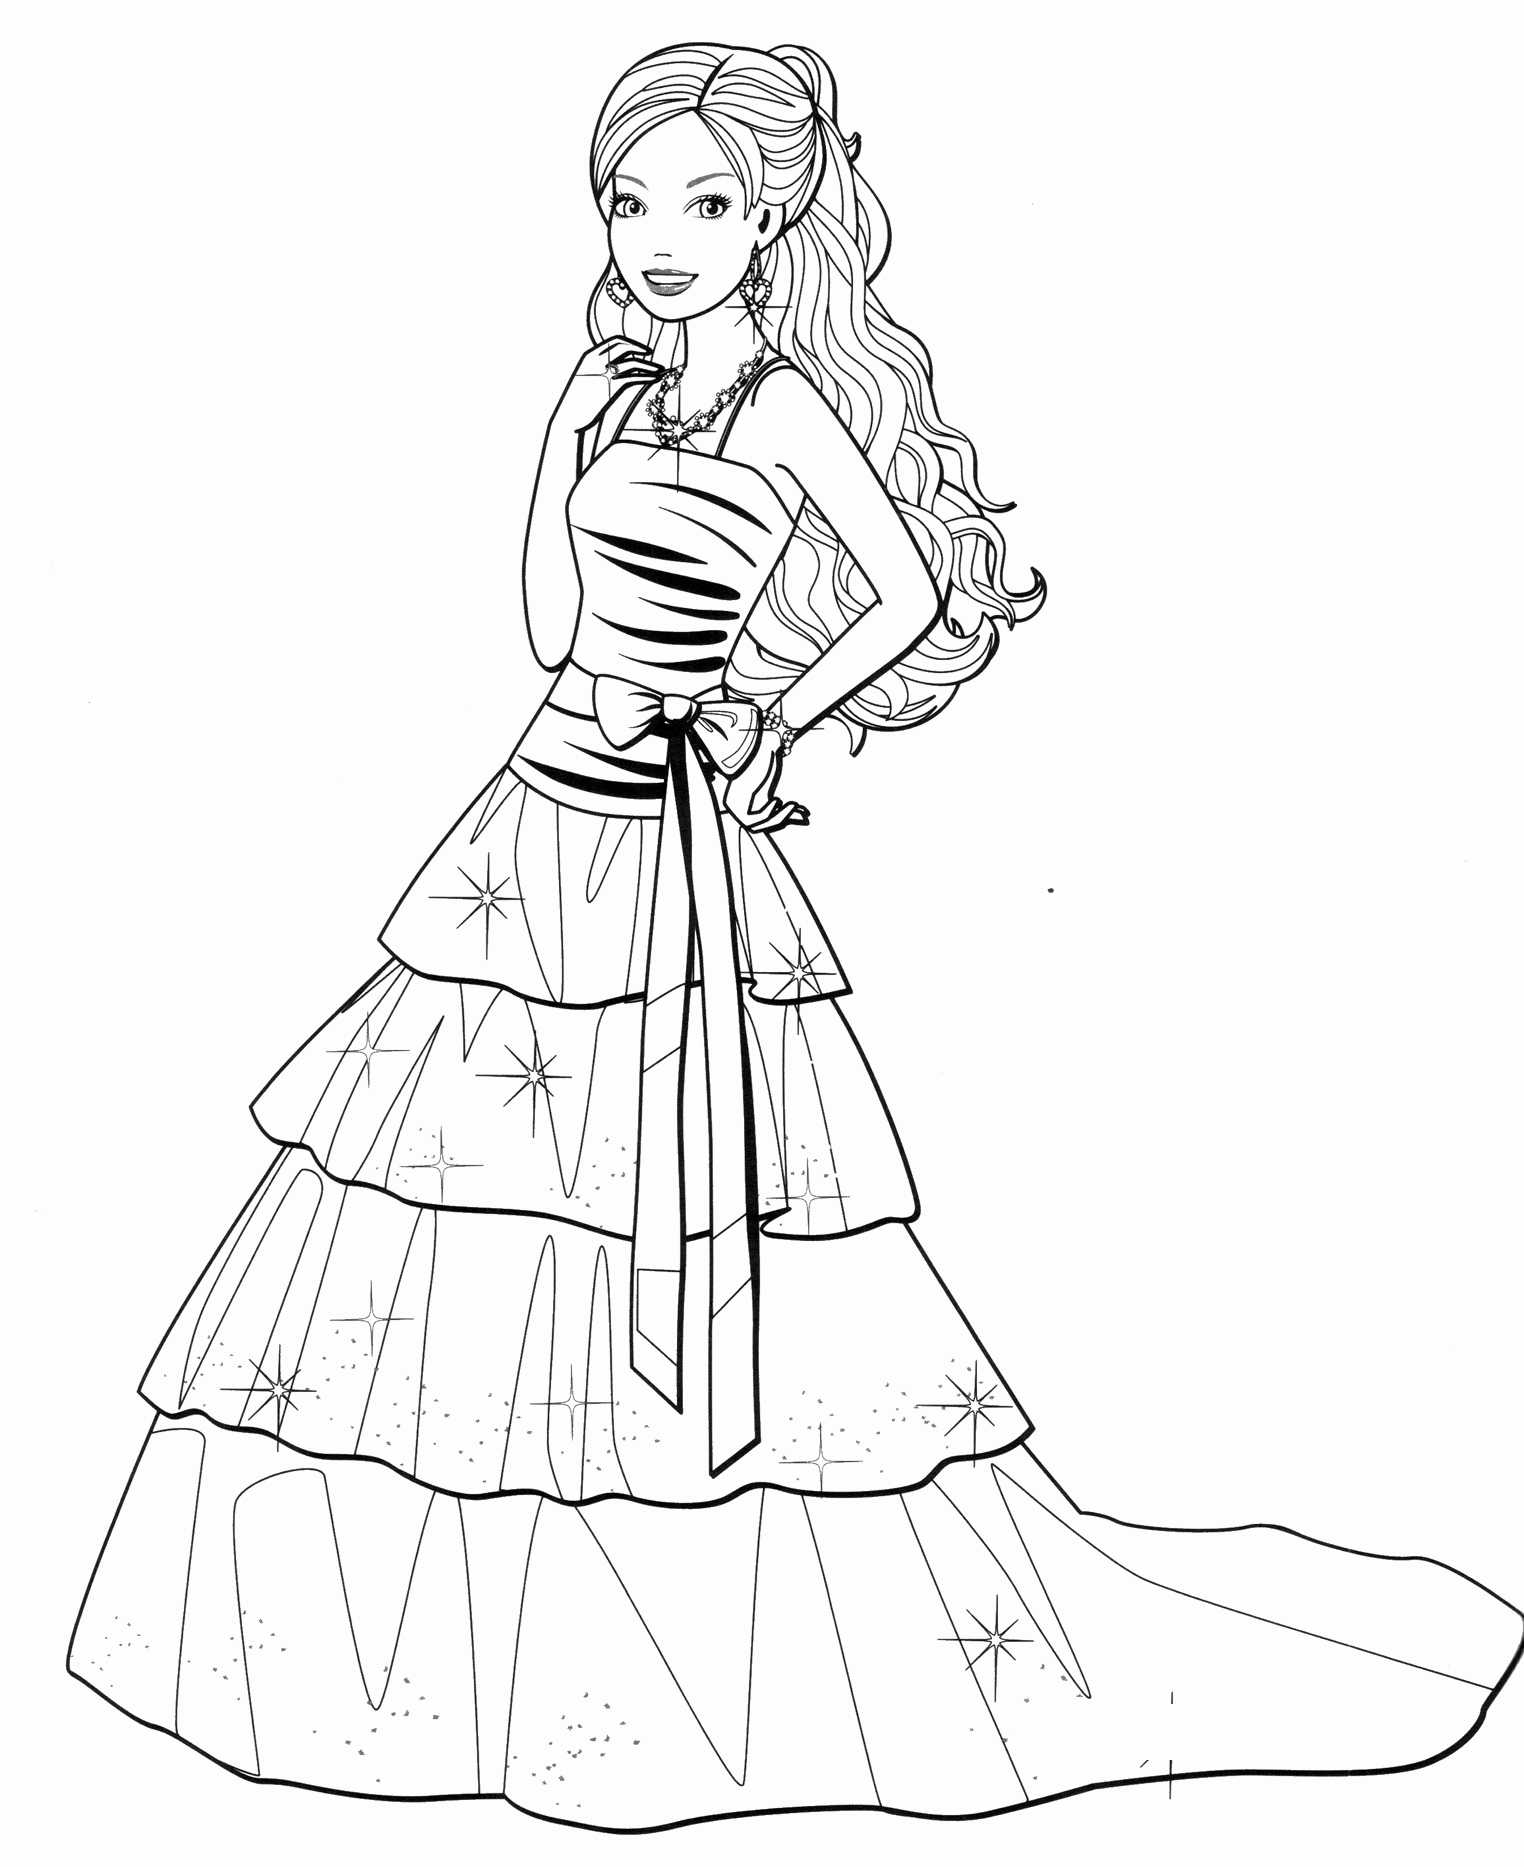 652 Animal Barbie Dress Coloring Pages 